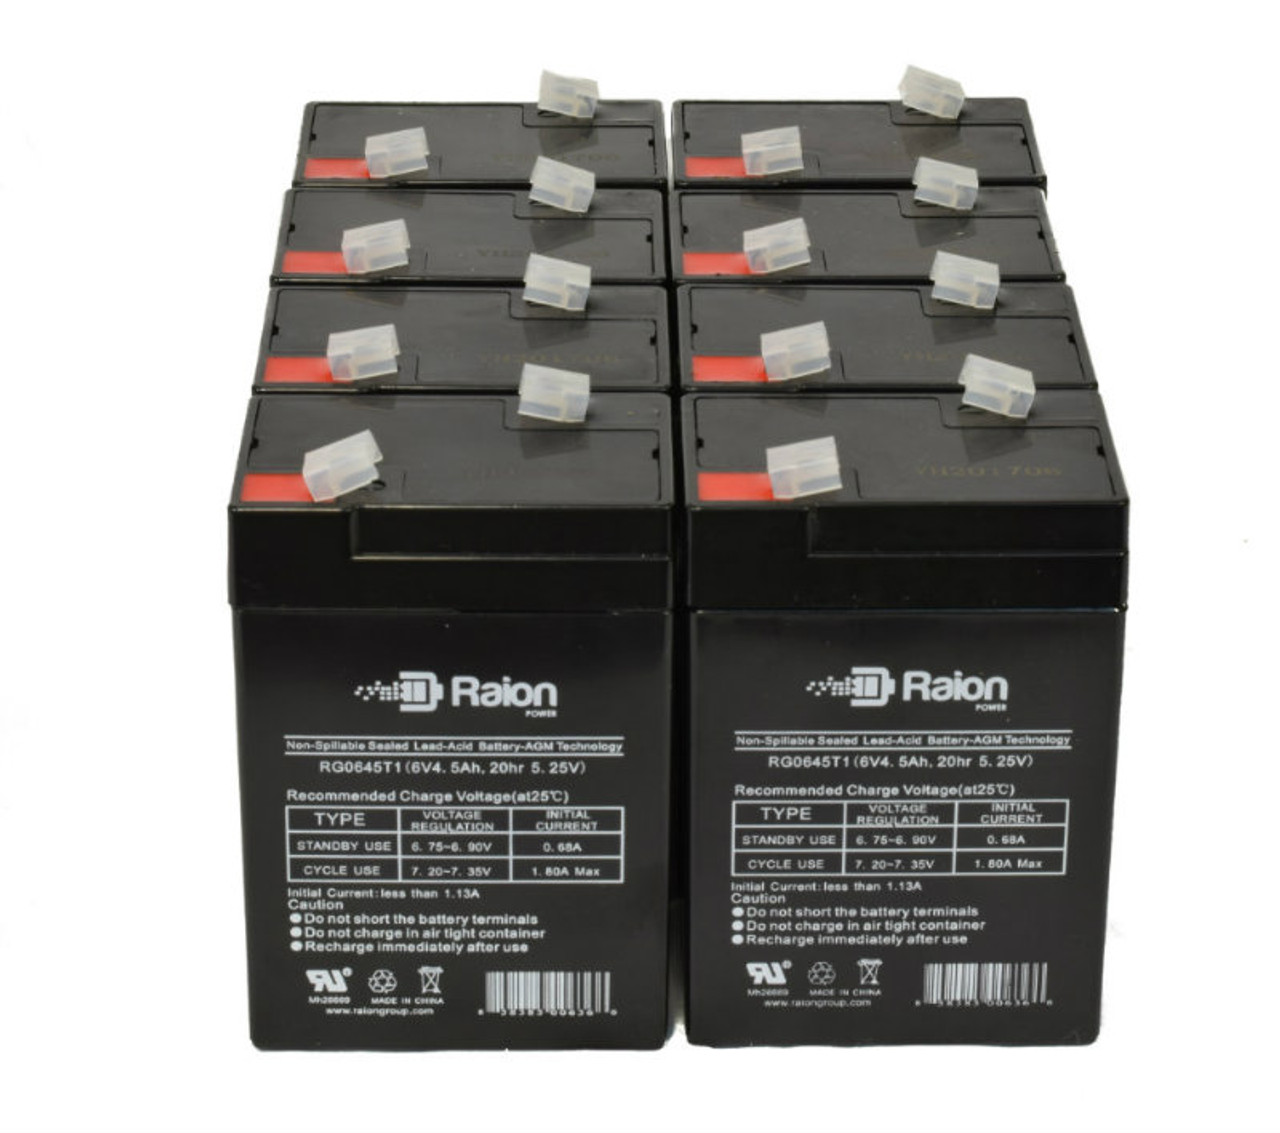 Raion Power 6 Volt 4.5Ah RG0645T1 Replacement Battery for AJC C5S - 8 Pack